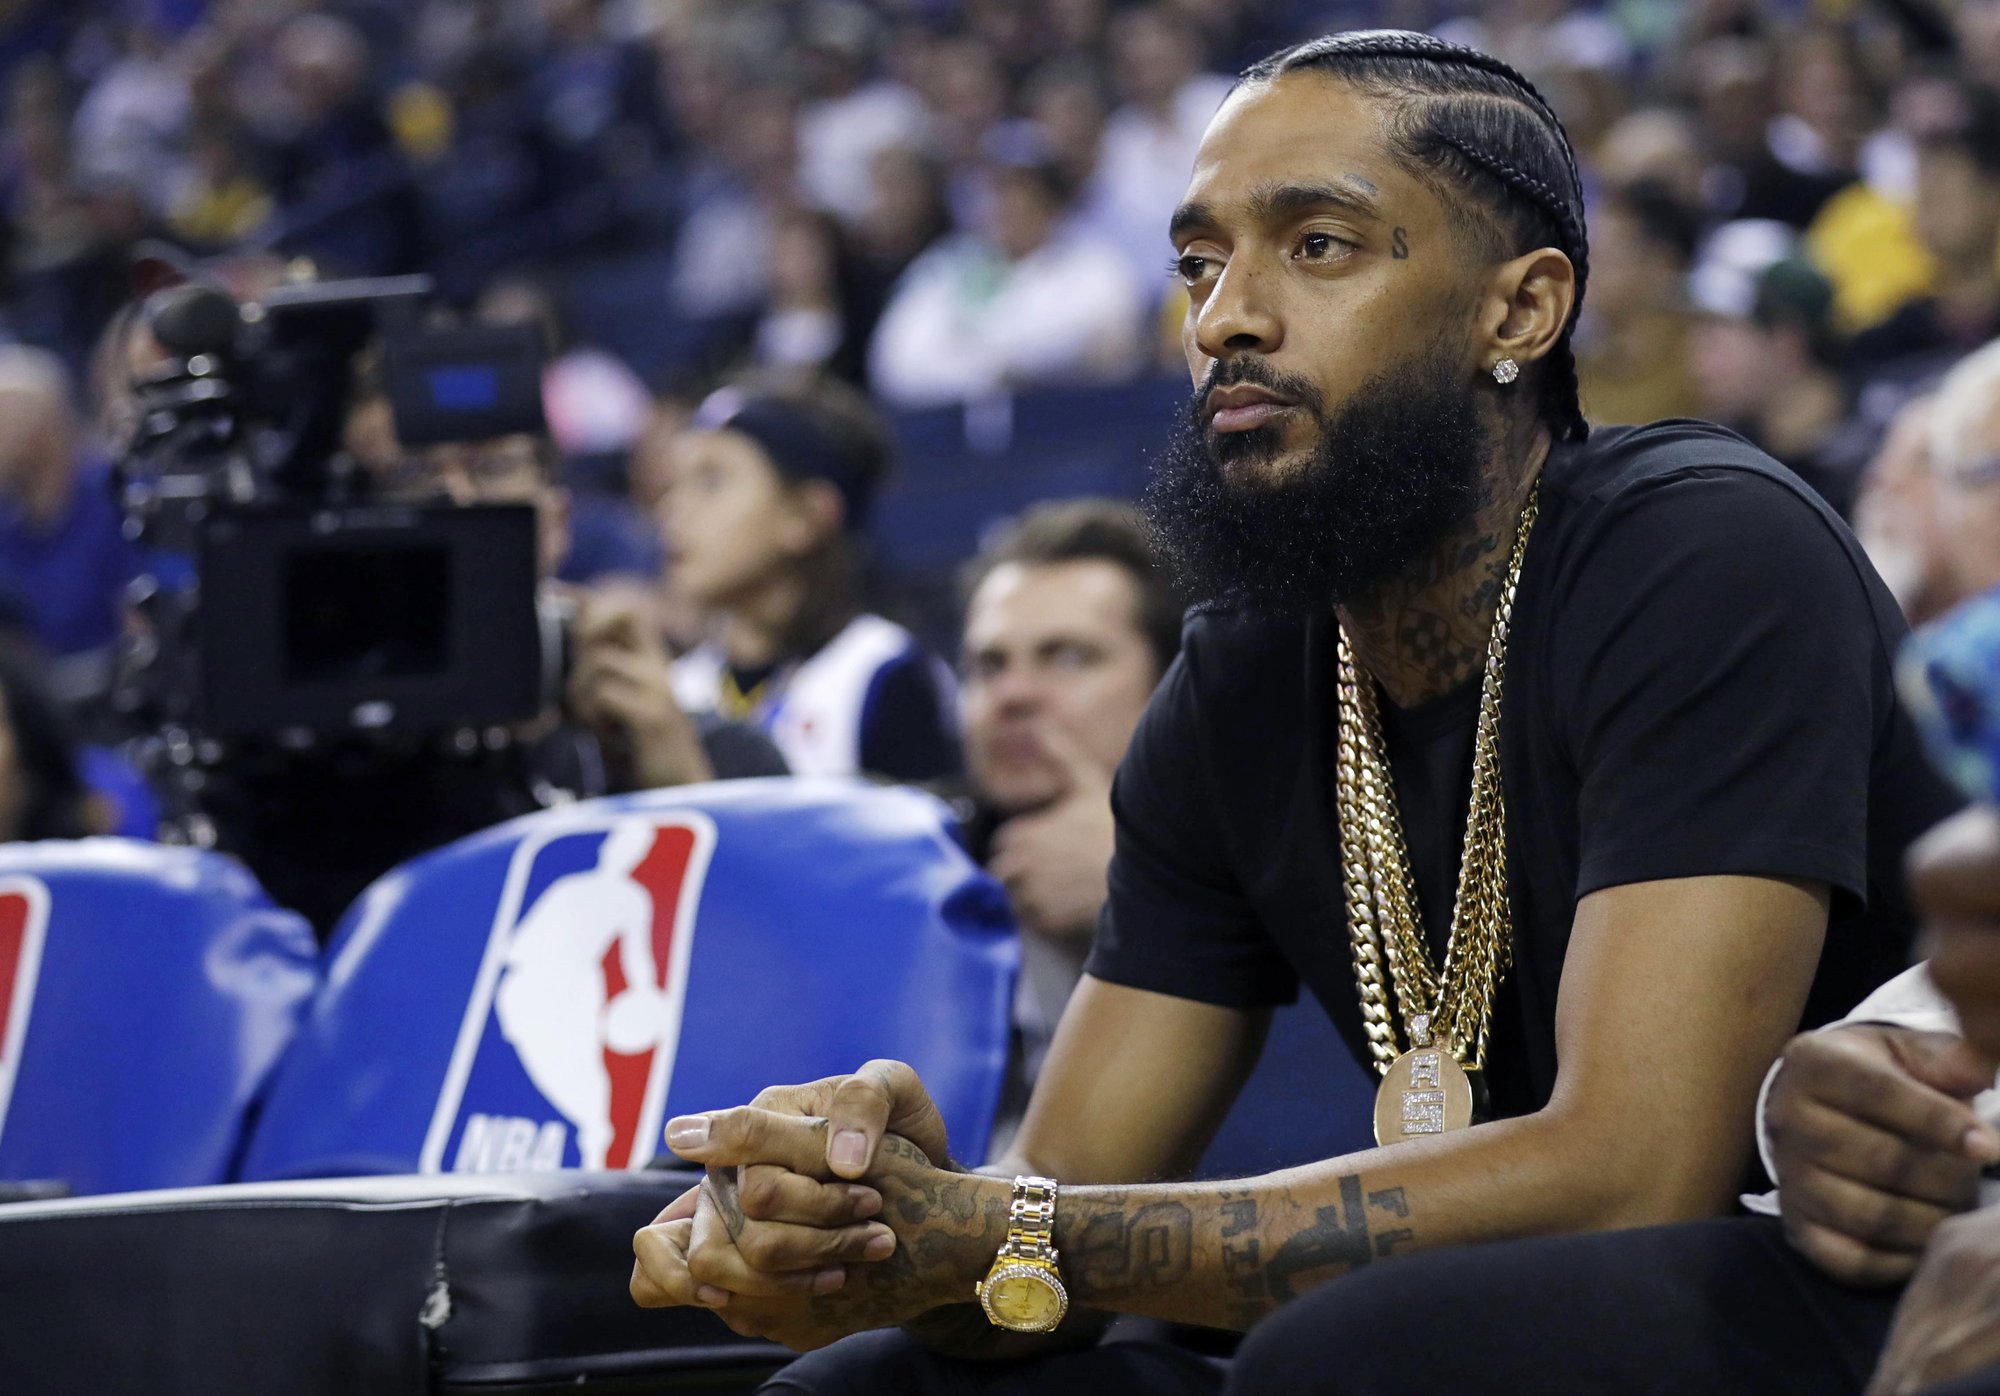 Los Angeles police identify suspect in rapper Nipsey Hussle slaying | The Zimbabwe Mail2000 x 1396